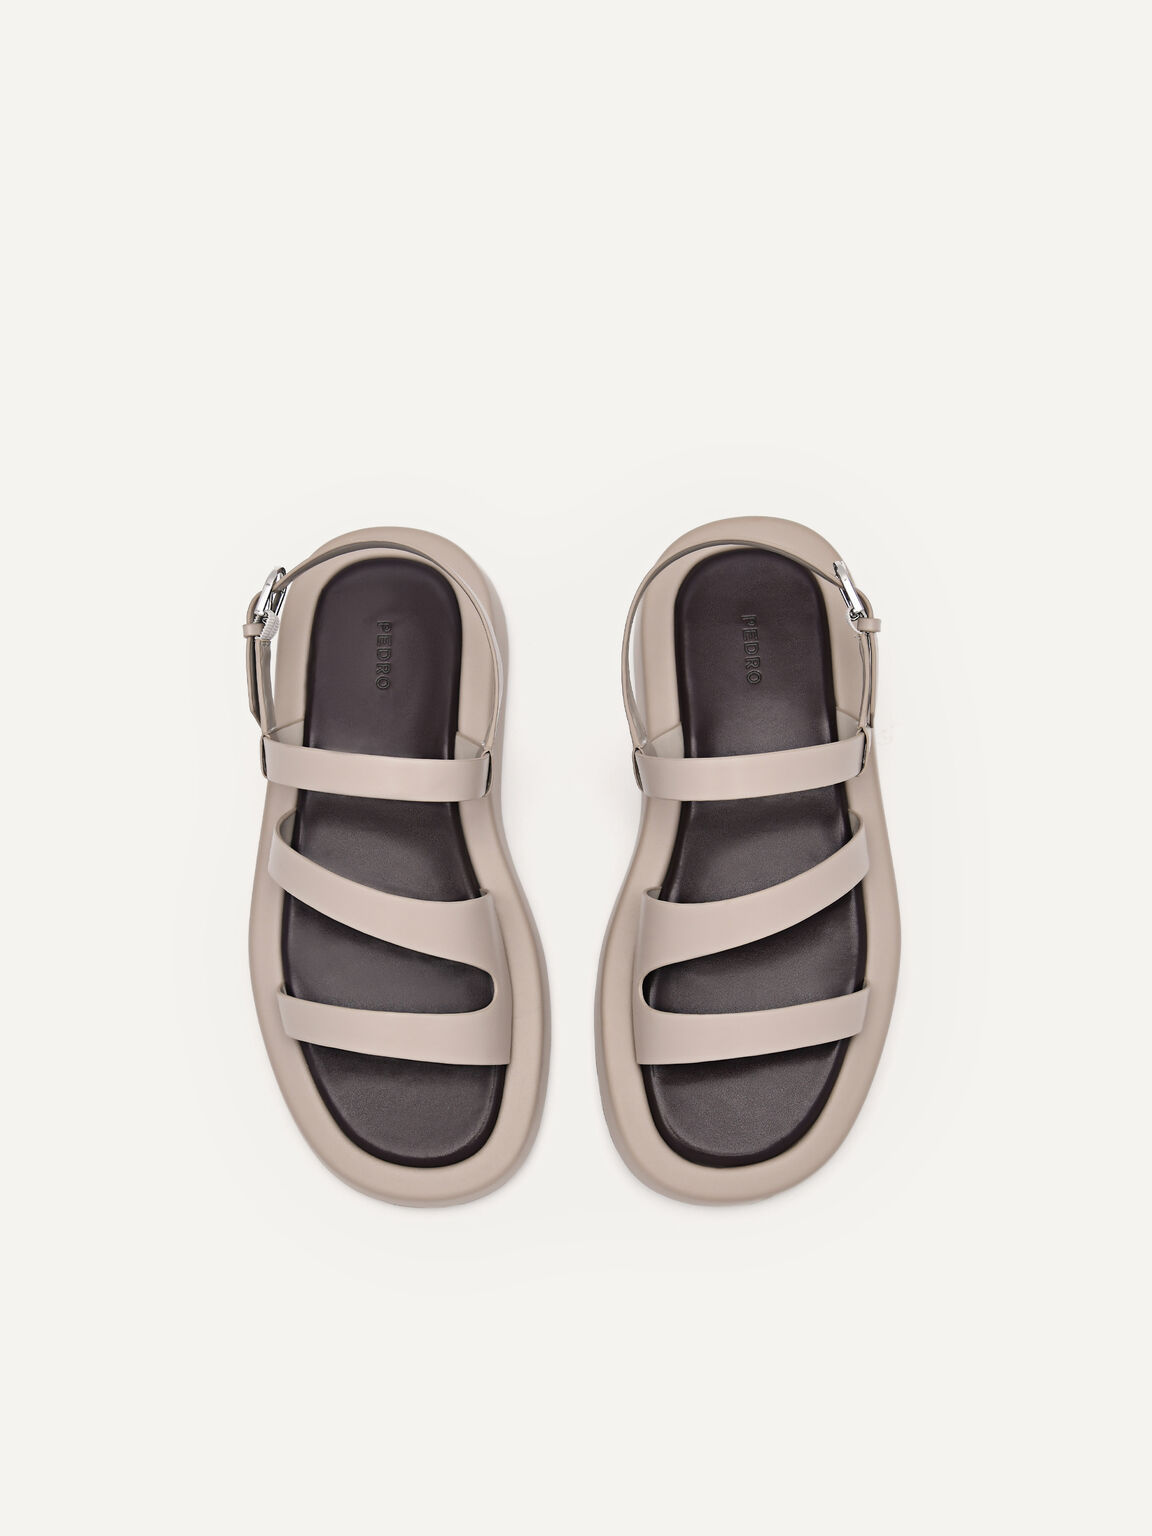 Cube Strappy Sandals, Taupe